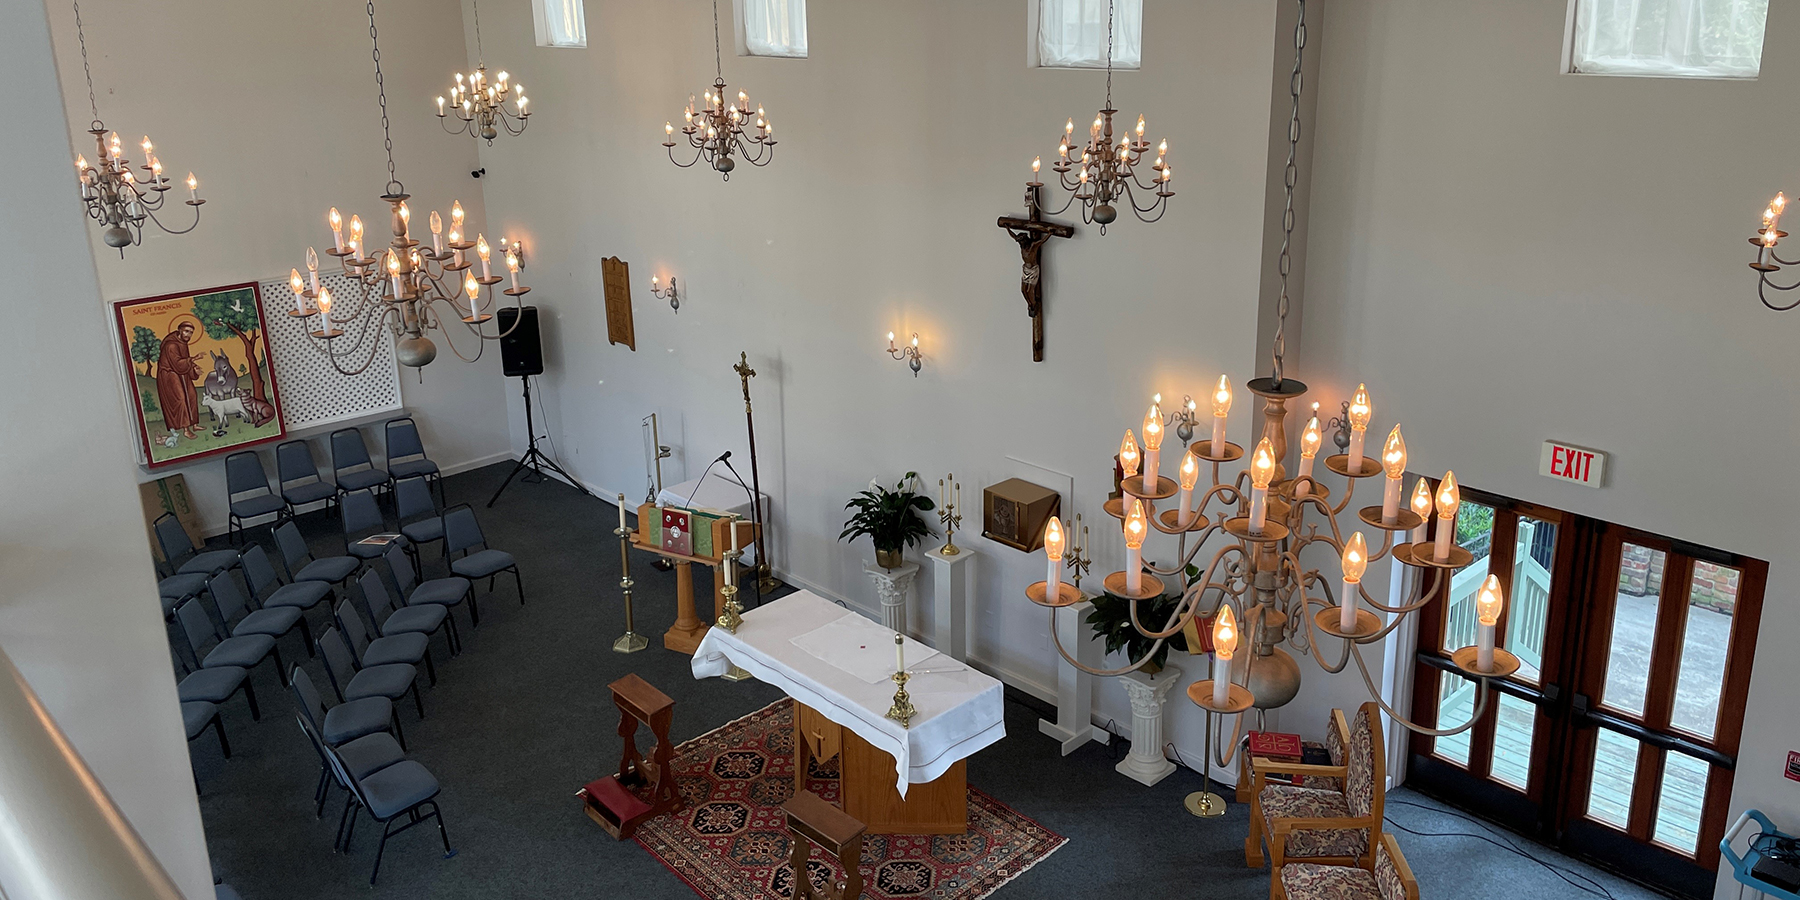 Mass held in Assisi Hall during church renovation